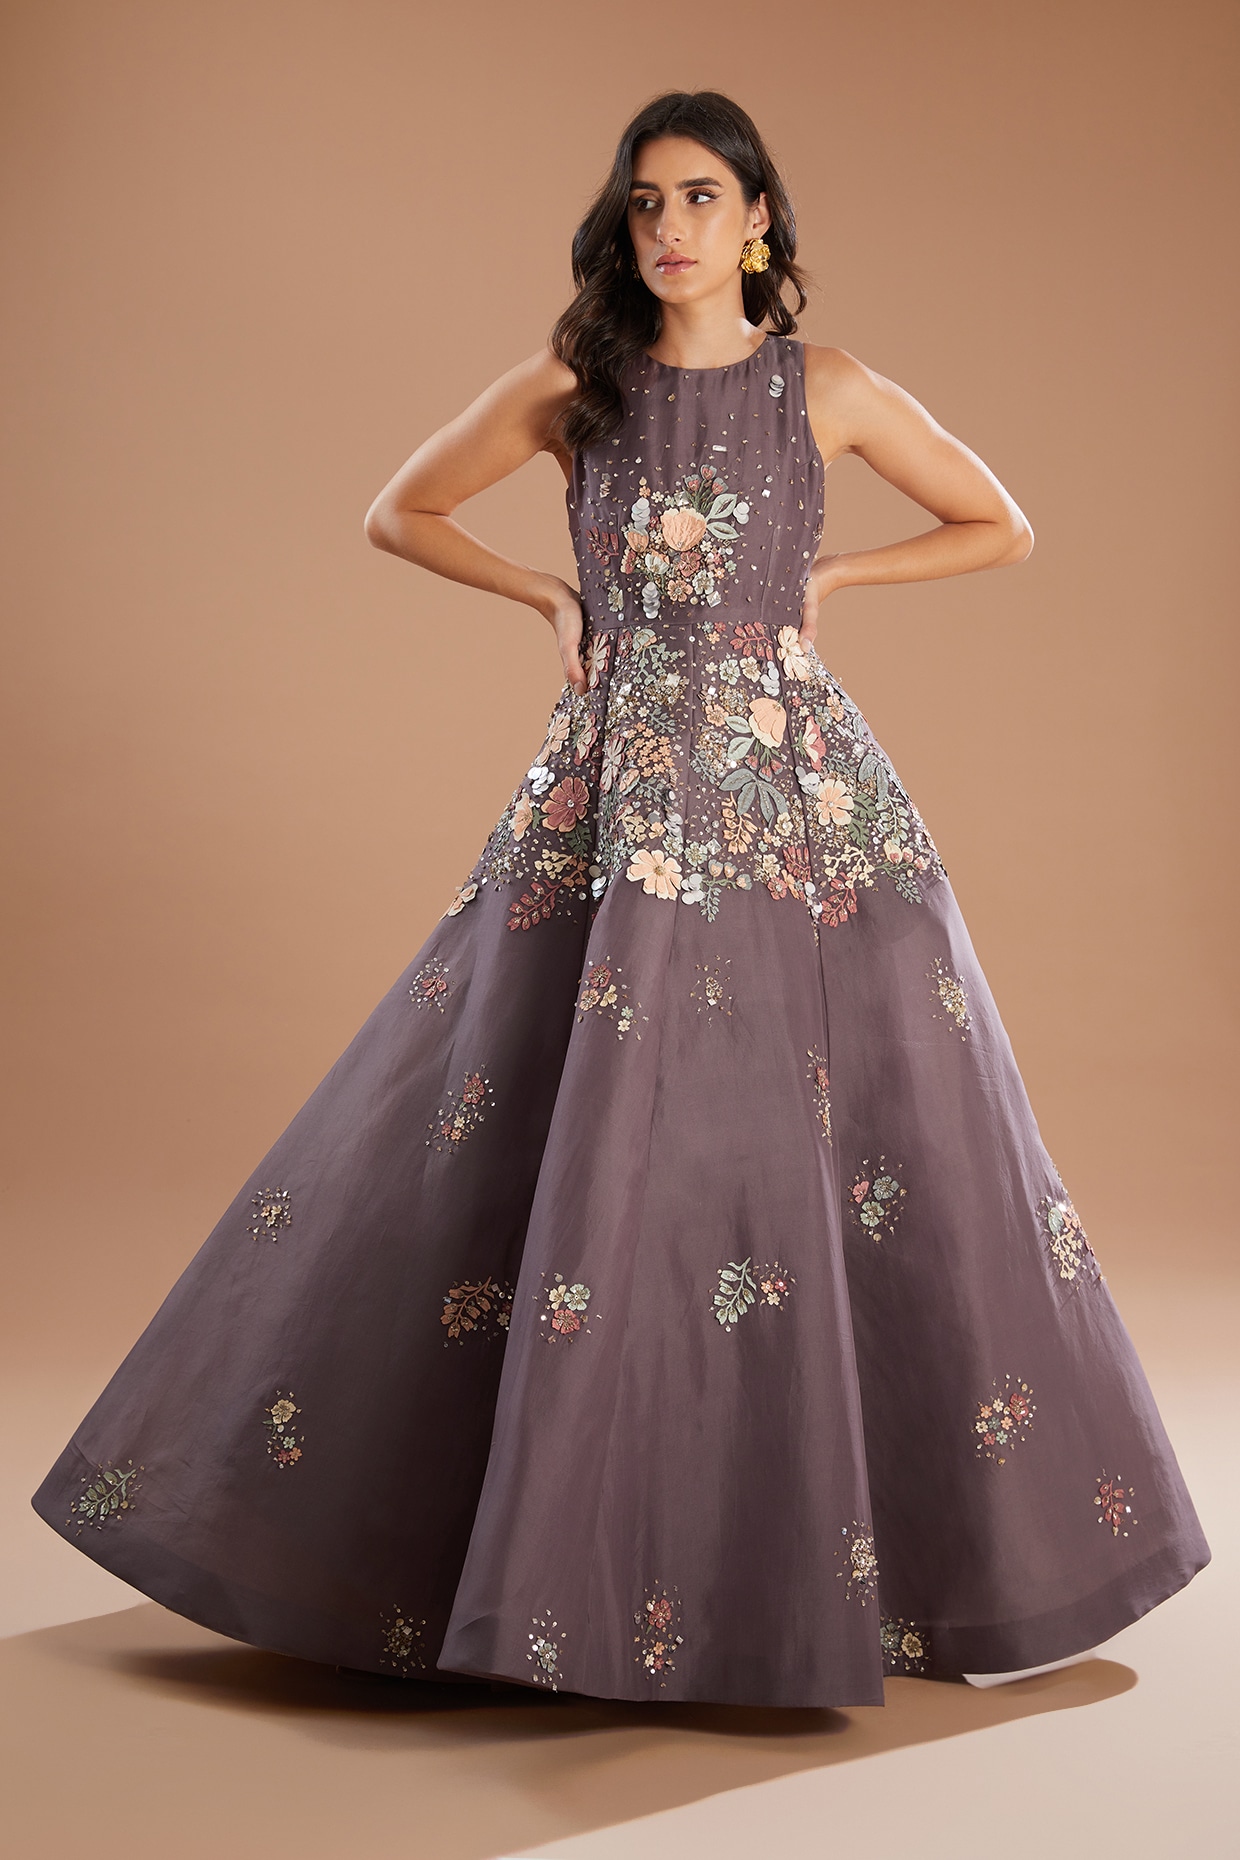 Dark Brown Gown dress | Designer gowns, Party wear gown, Printed gowns